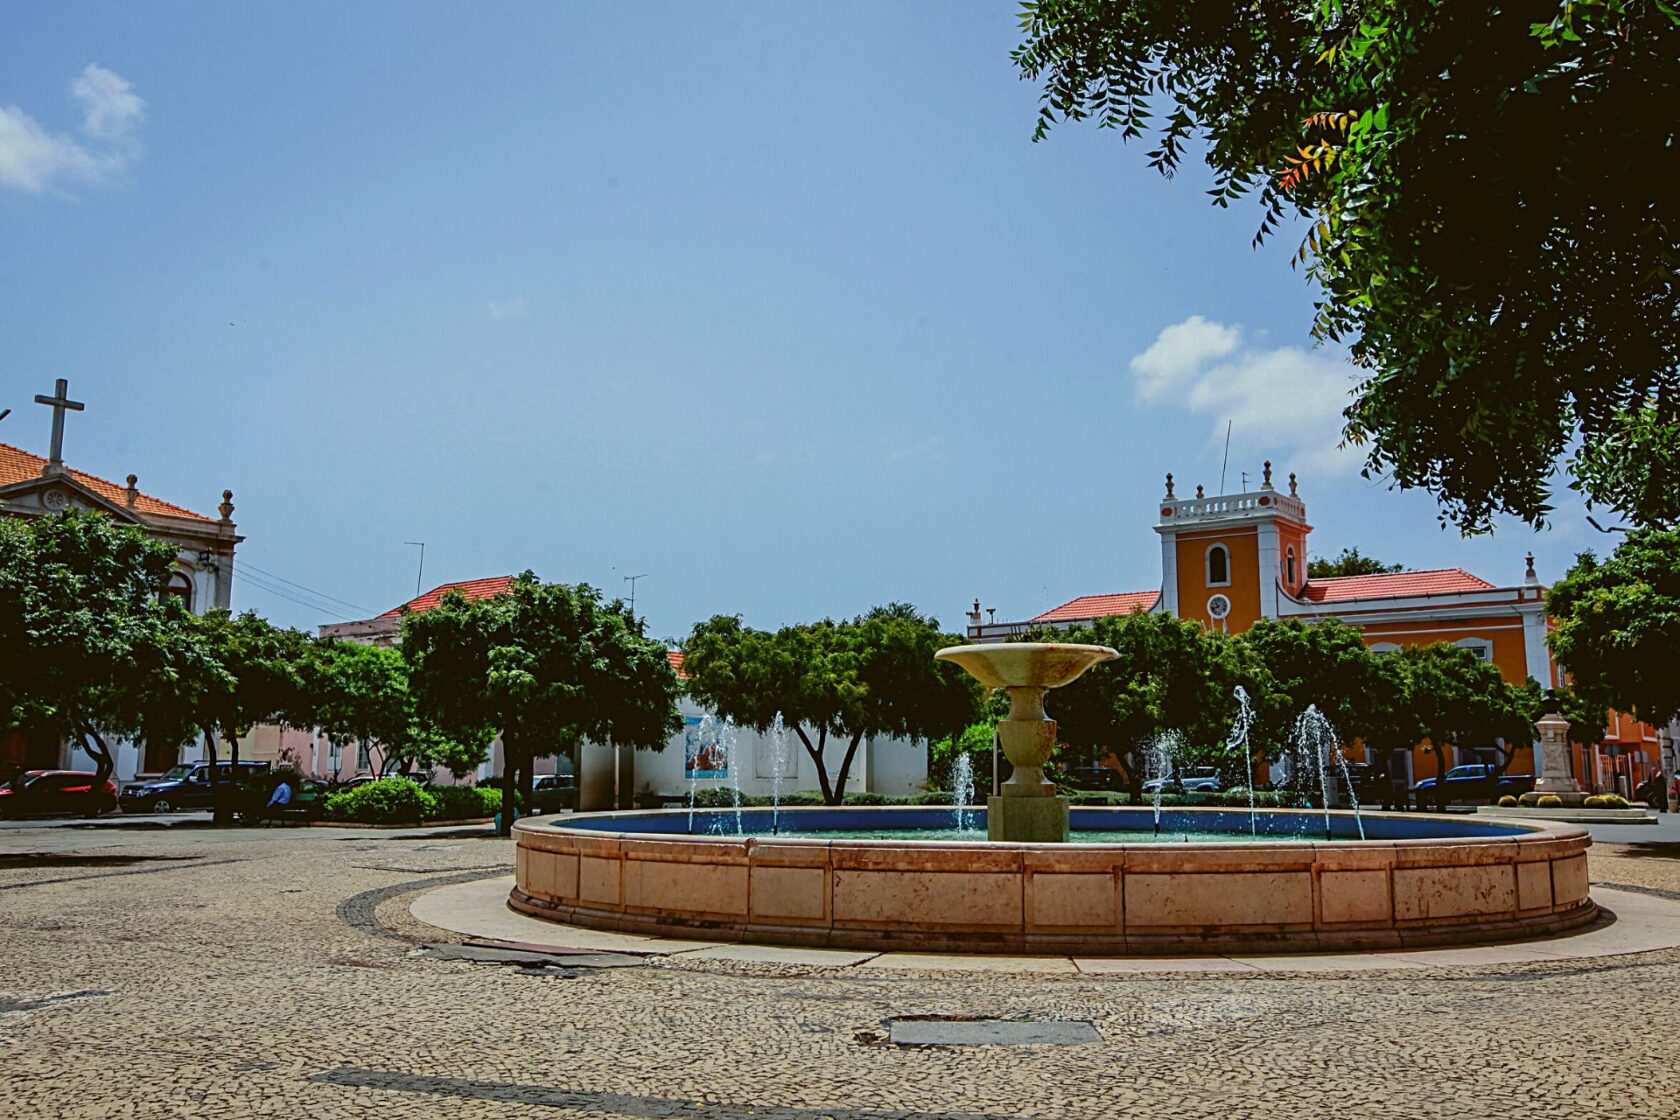 A view of buildings and a fountain in Praia on Cape Verde (an Atlantis site).